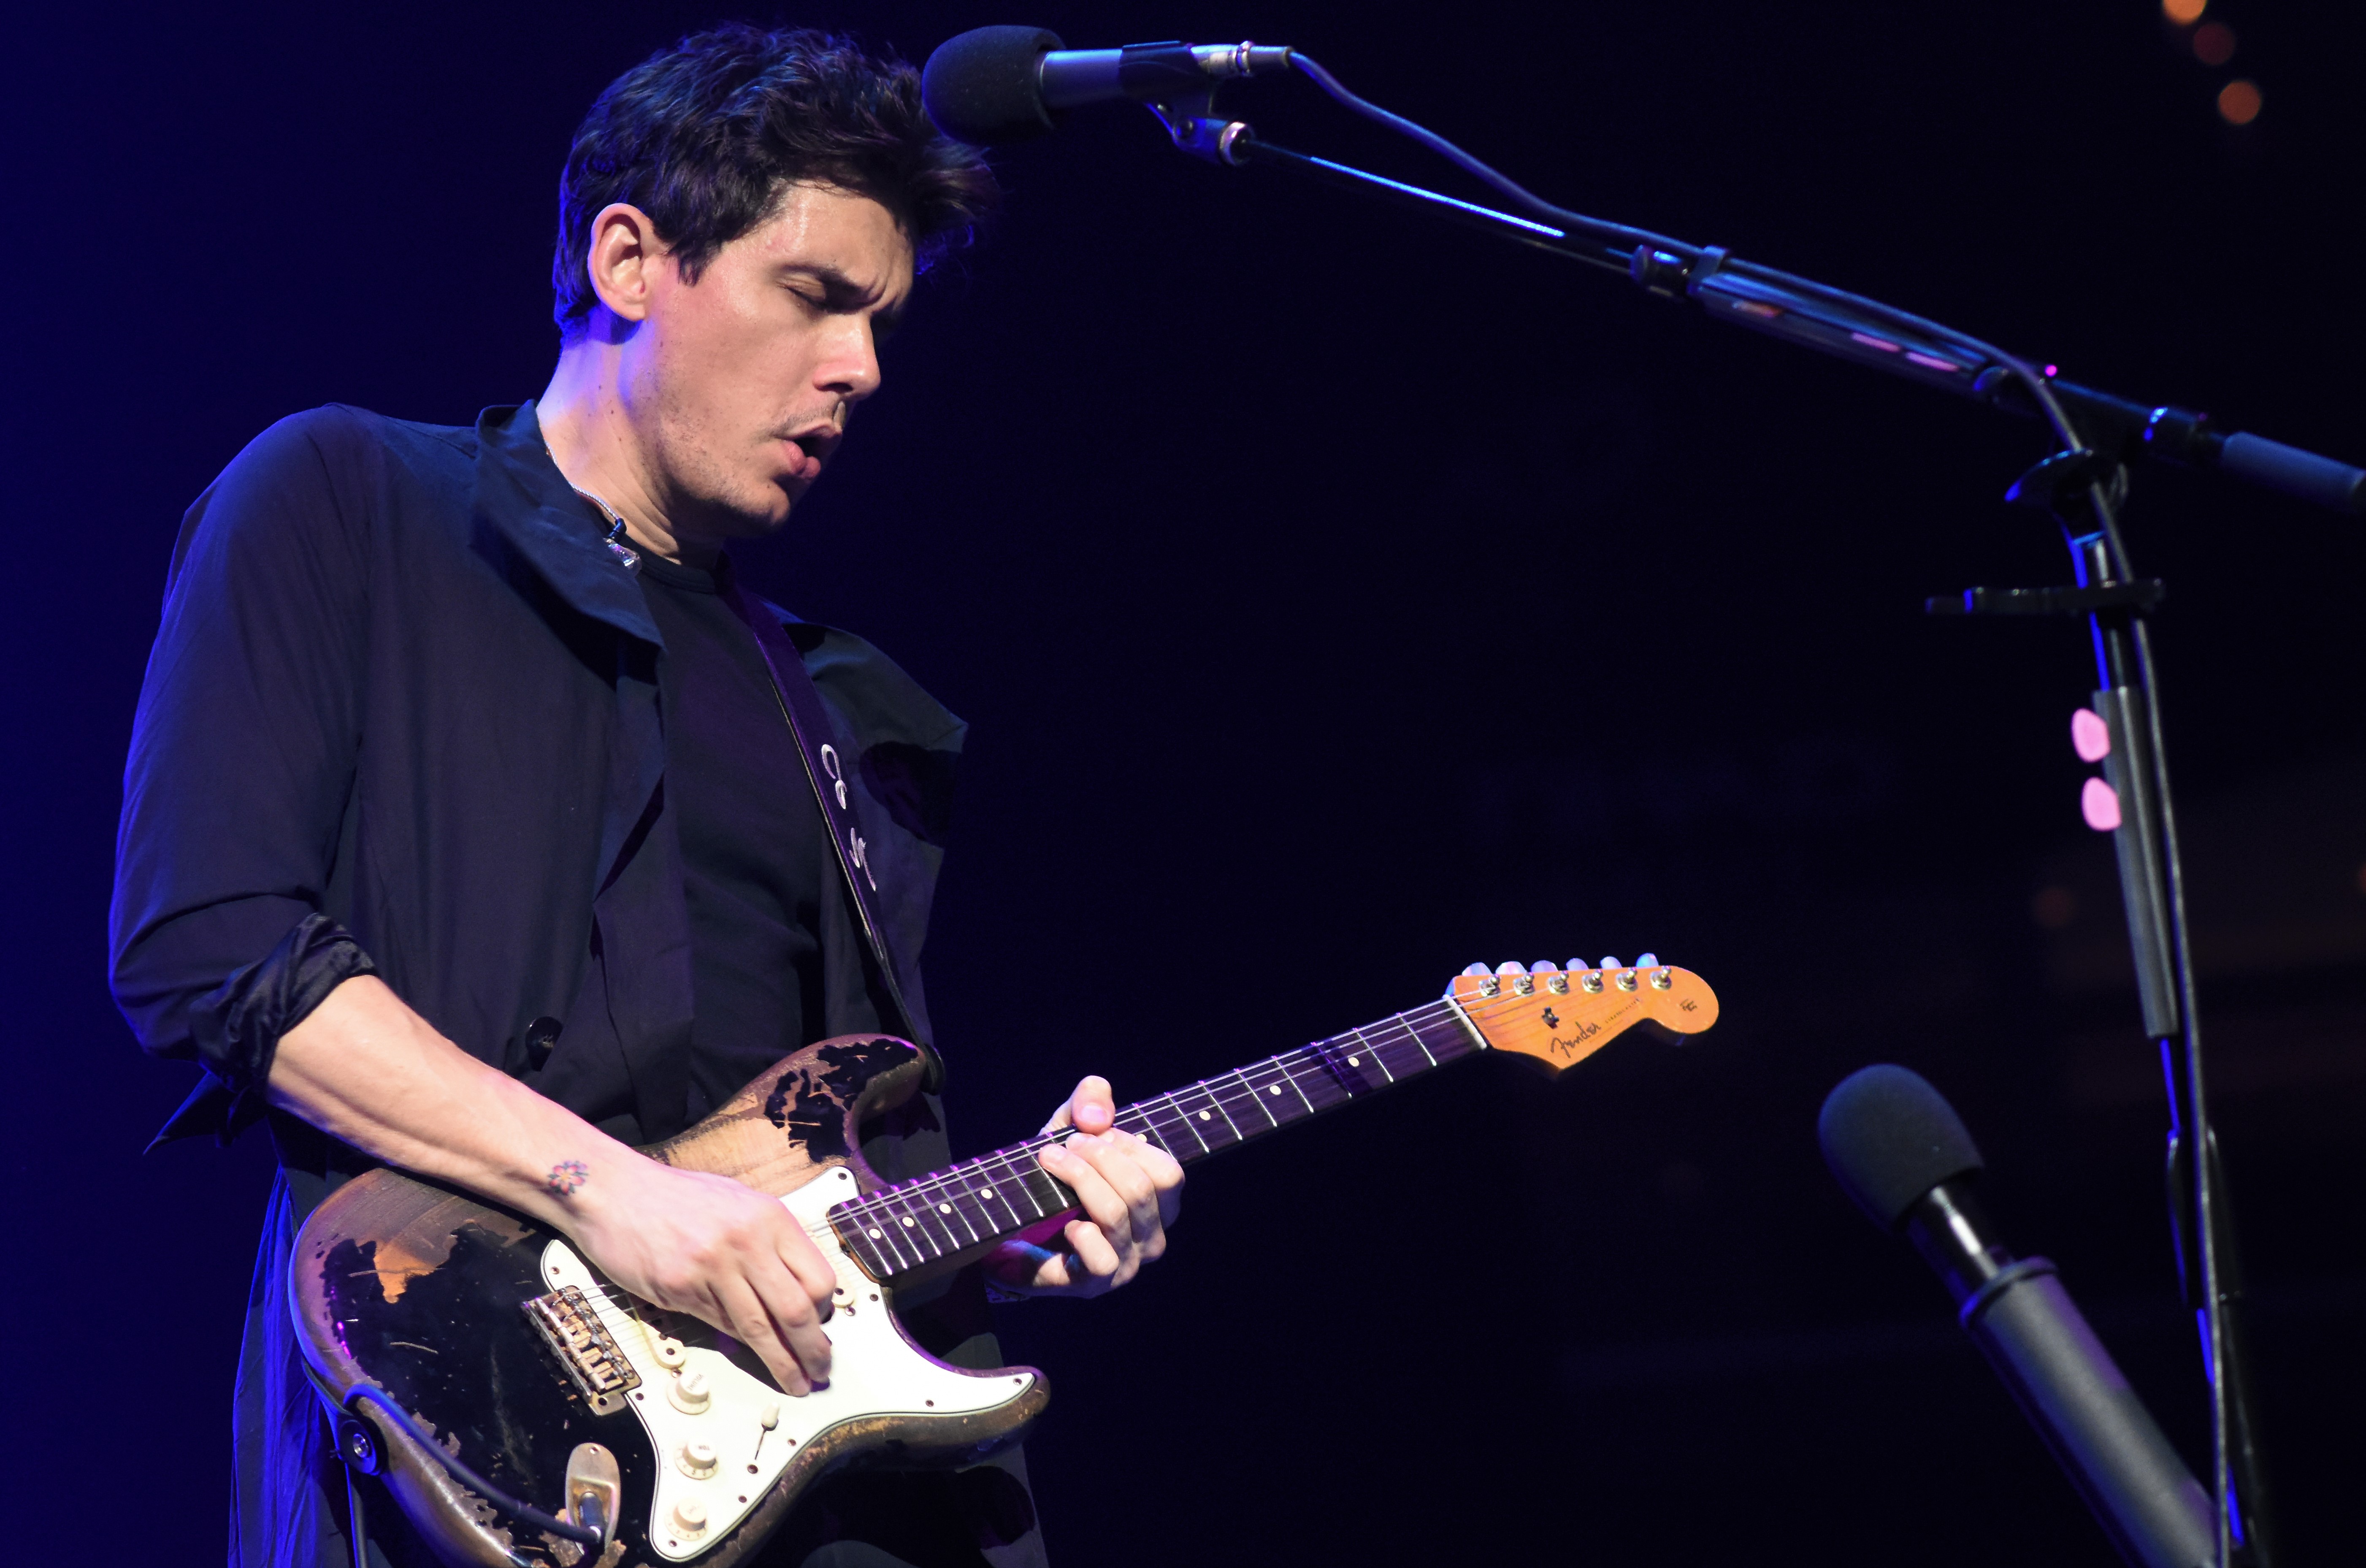 John mayer stopped through the nations capital.